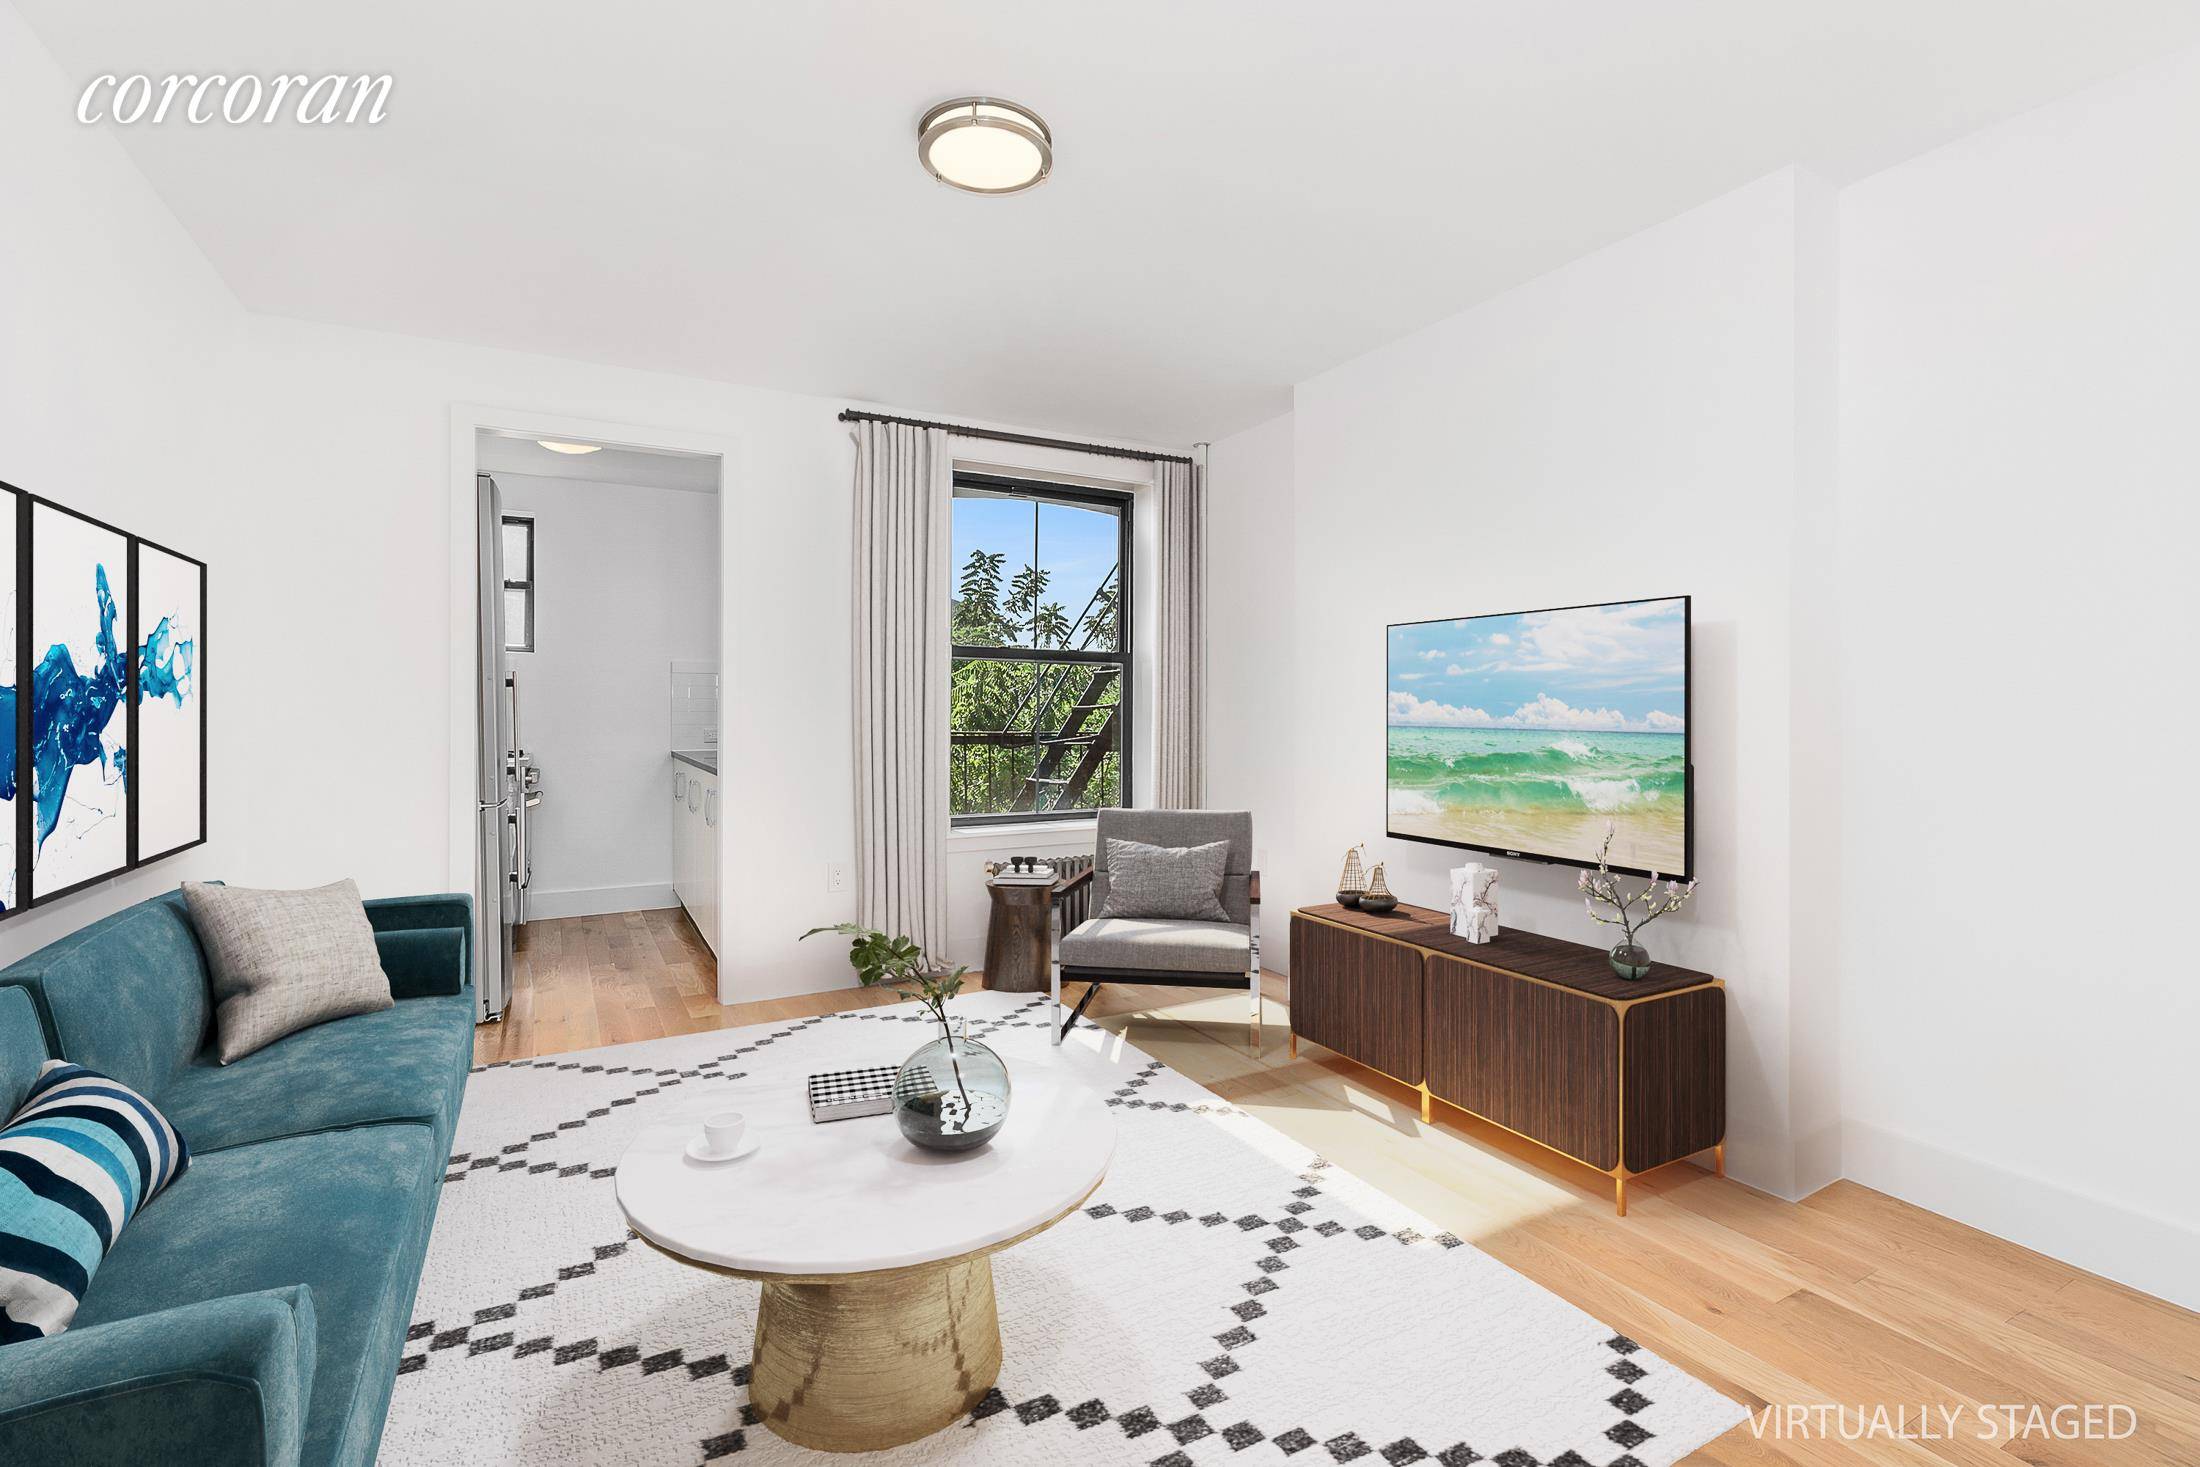 Located in historic Cobble Hill, 439 Hicks Street, Apartment 5D is a beautifully renovated one bedroom, one bath condominium with open city views and peeks of New York Harbor.